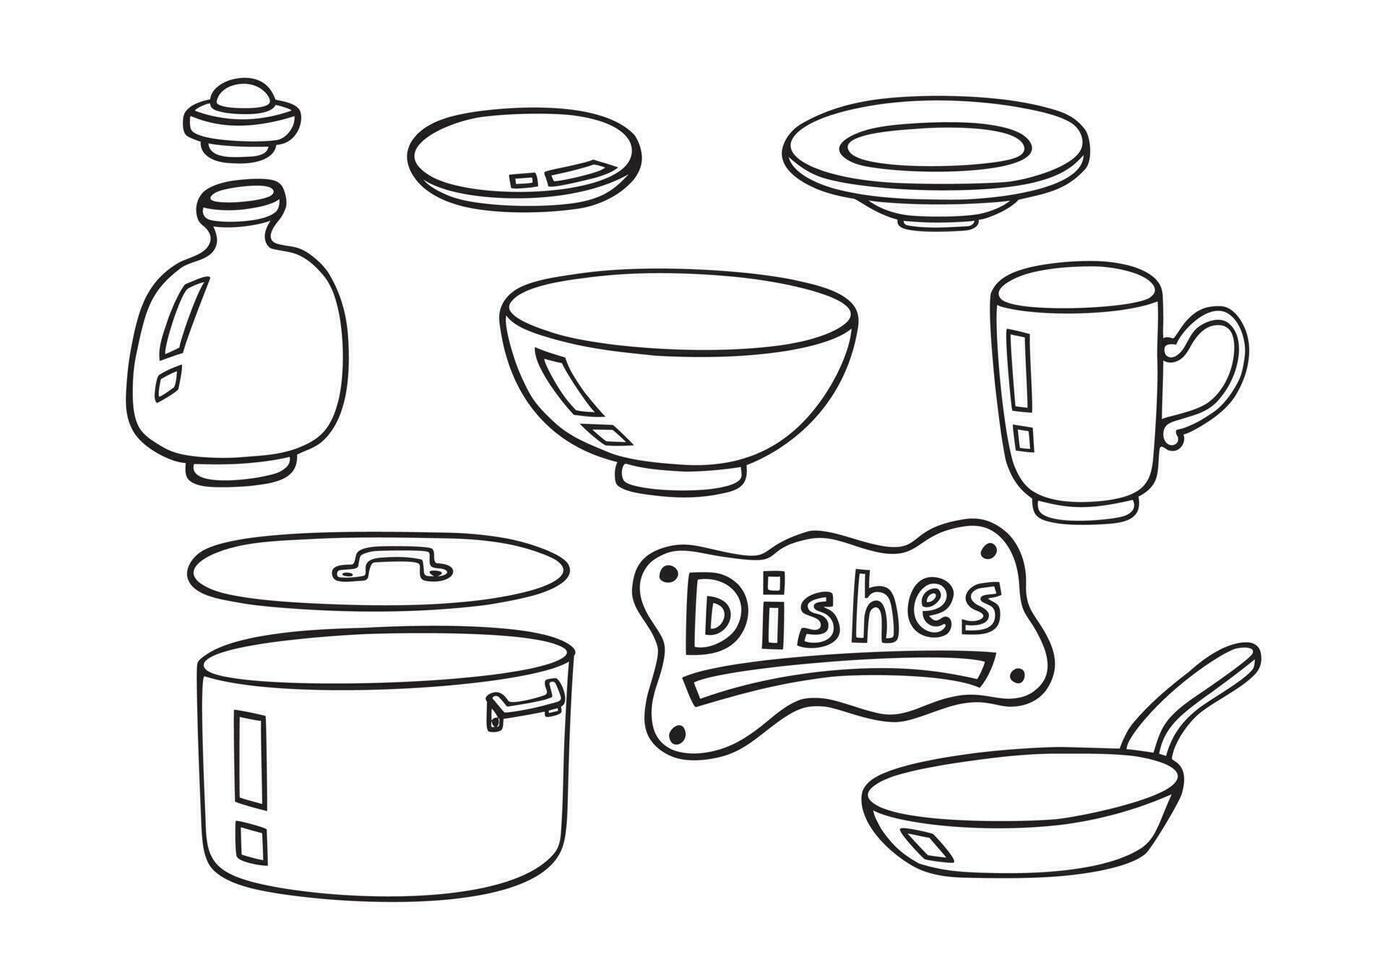 Doodle dishes vector set. Kitchen equipment and objects for cooking. Hand drawn style. Black and white.